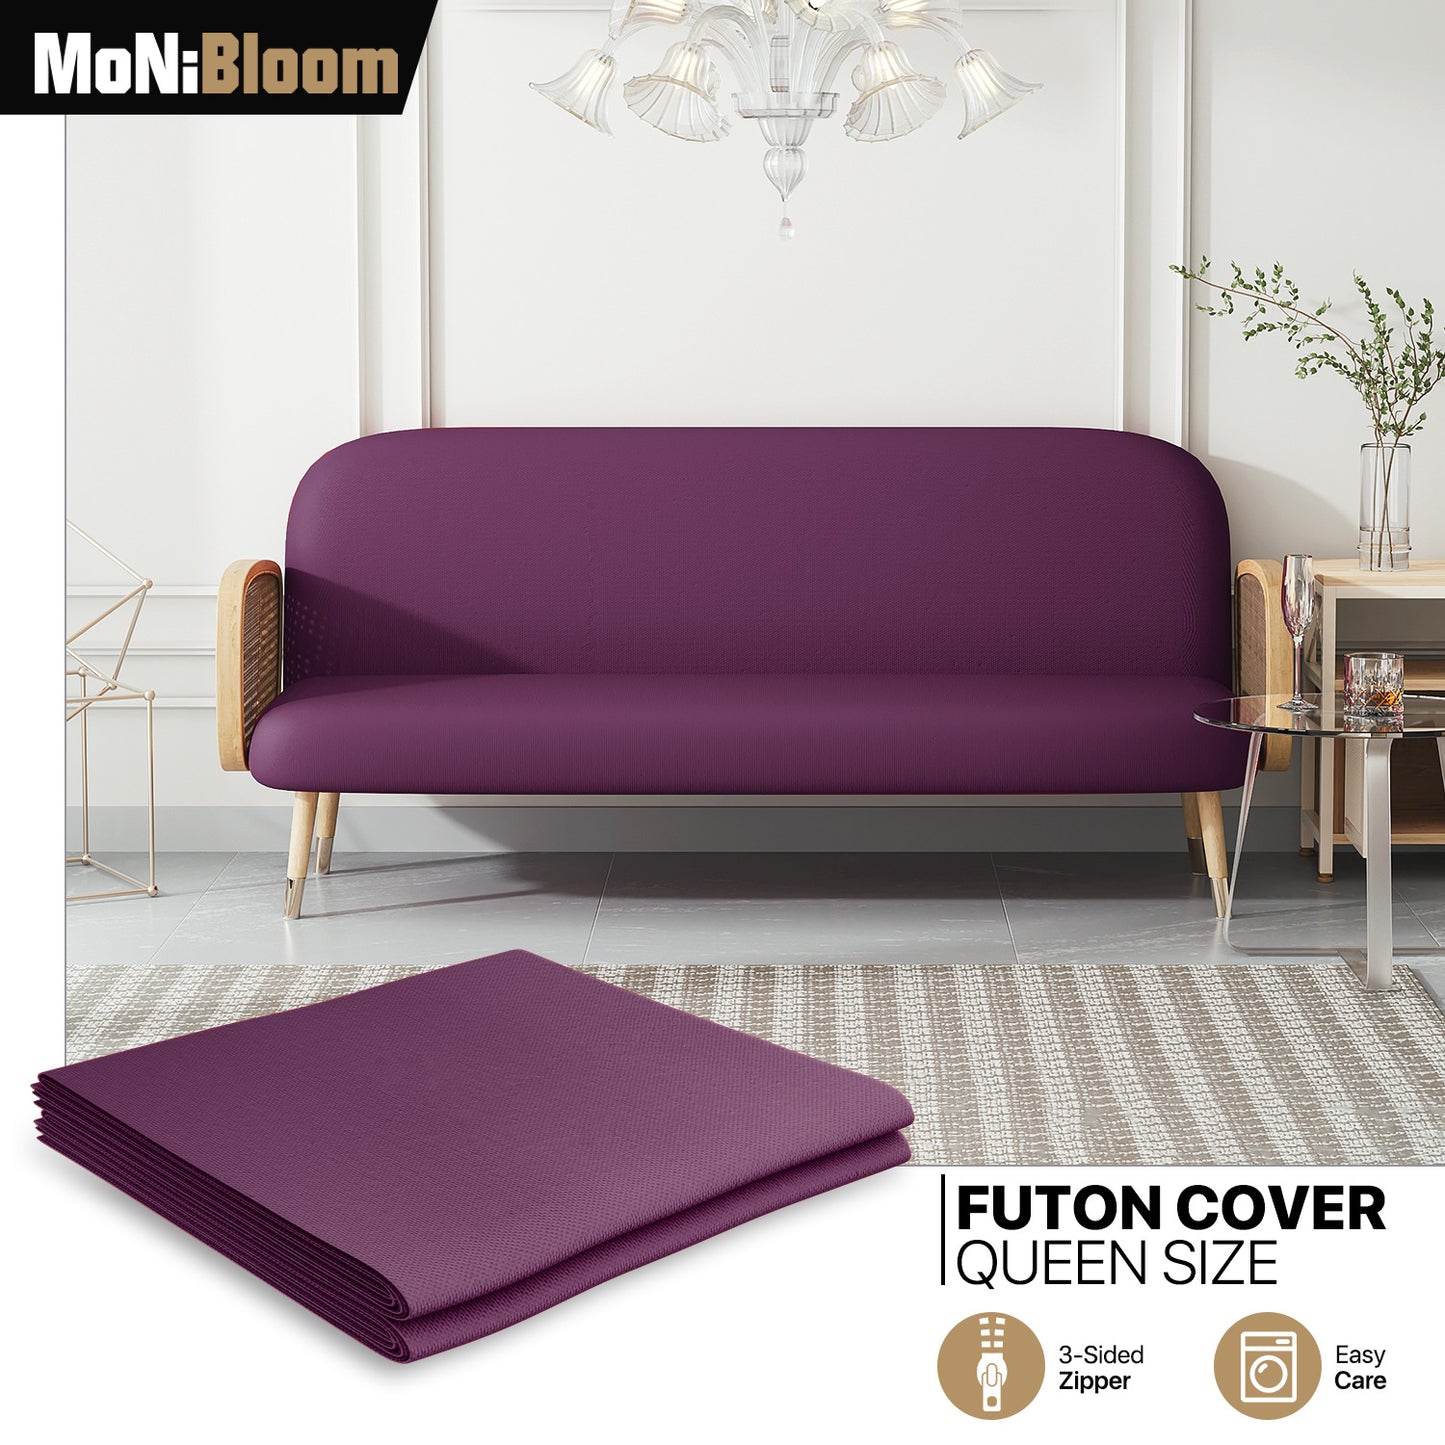 Futon Cover - Polyester - Queen Size 60"x80"x2"